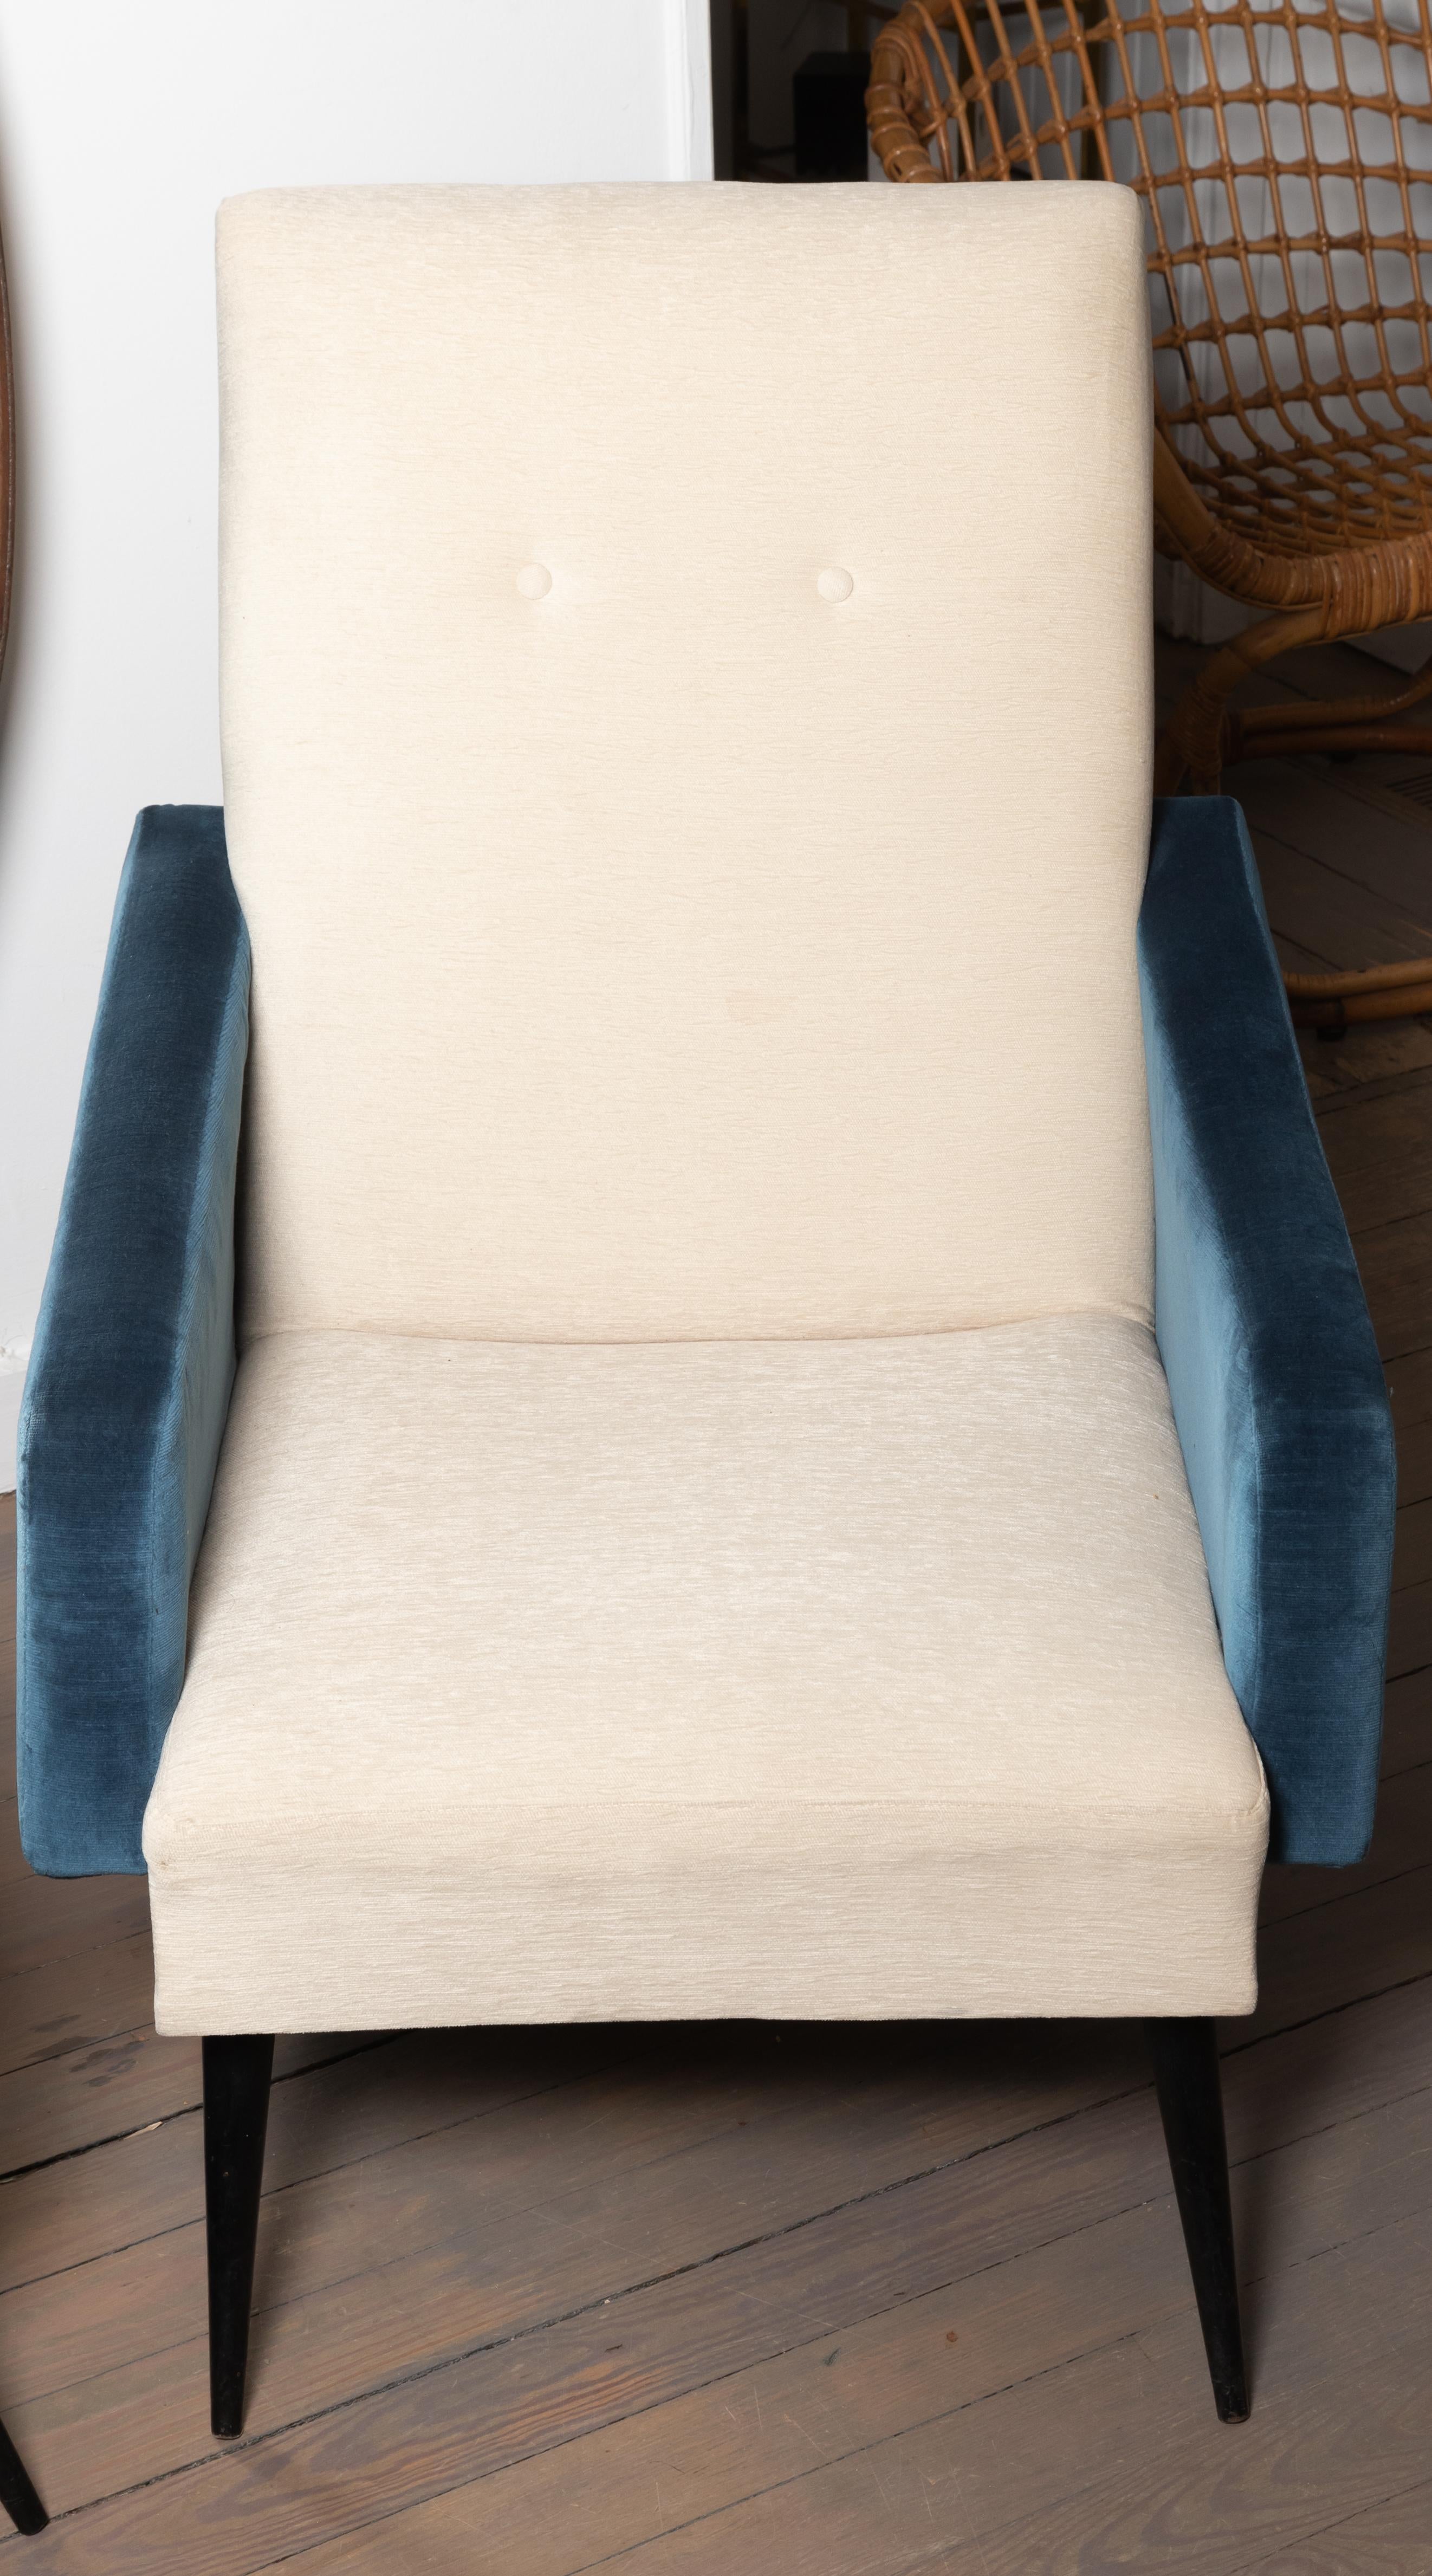 Pair Of Blue And White Upholstered Armchairs For Sale At 1stdibs